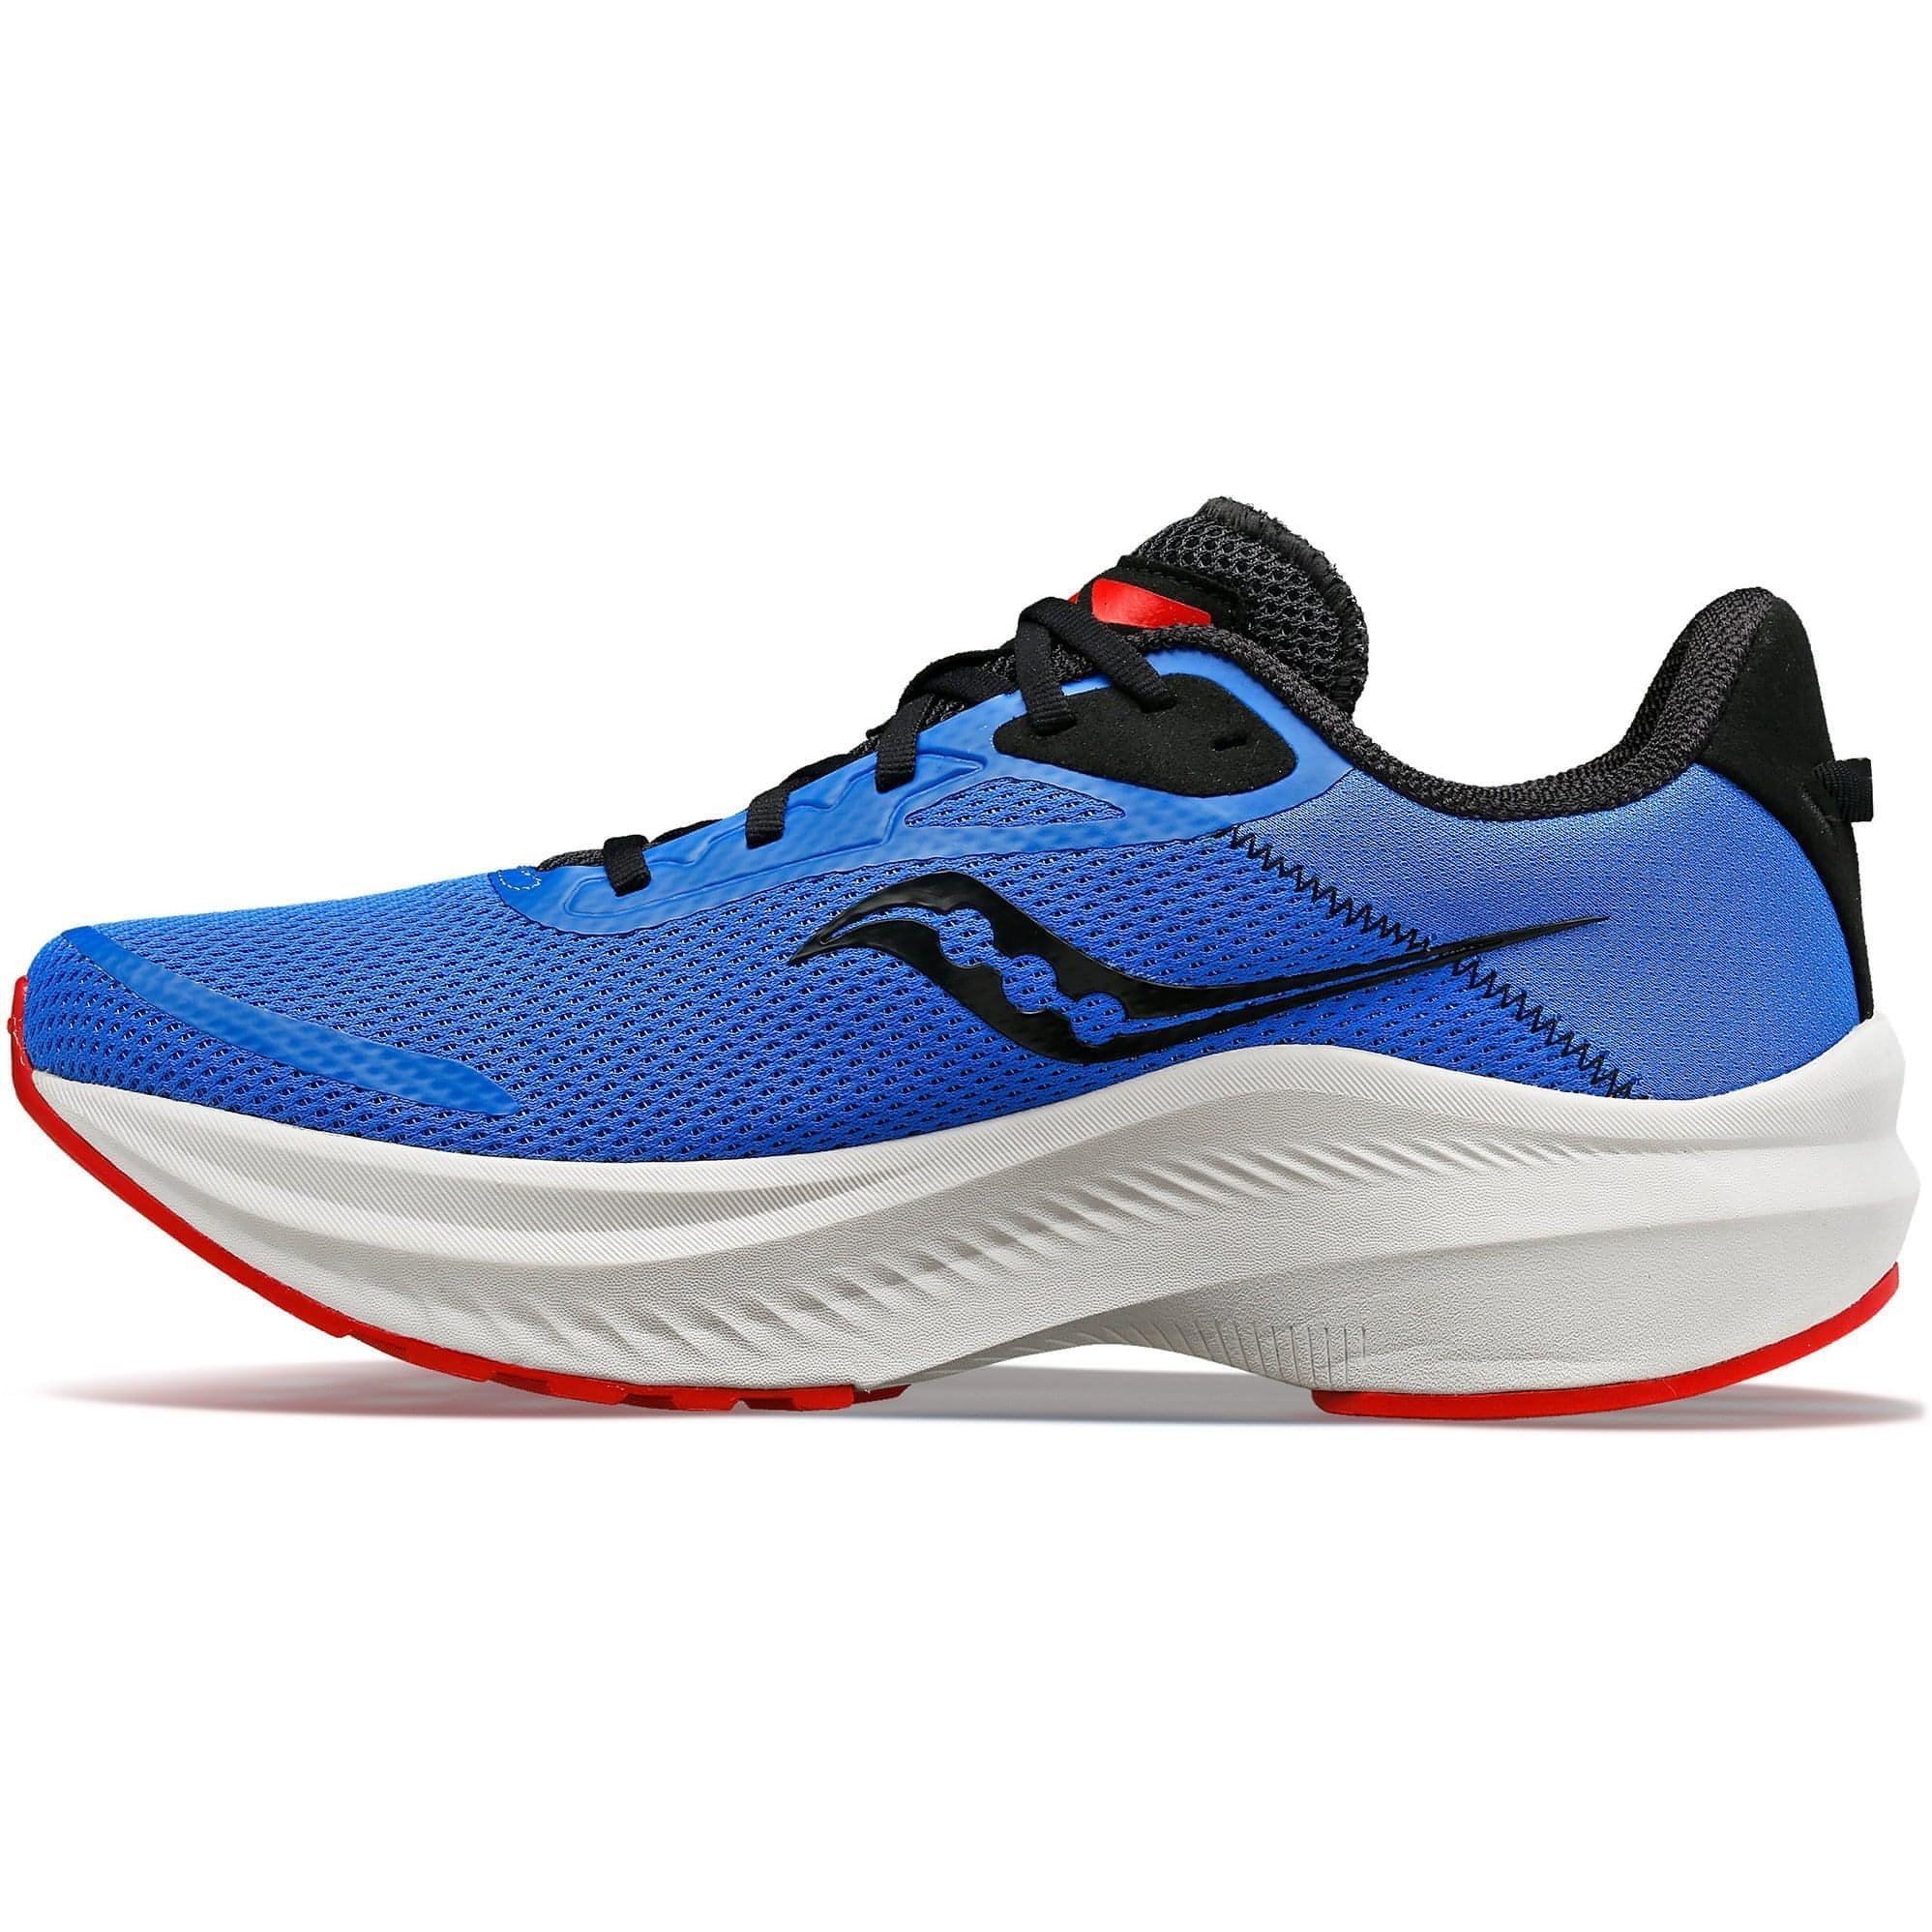 Saucony Axon 3 Mens Running Shoes - Blue